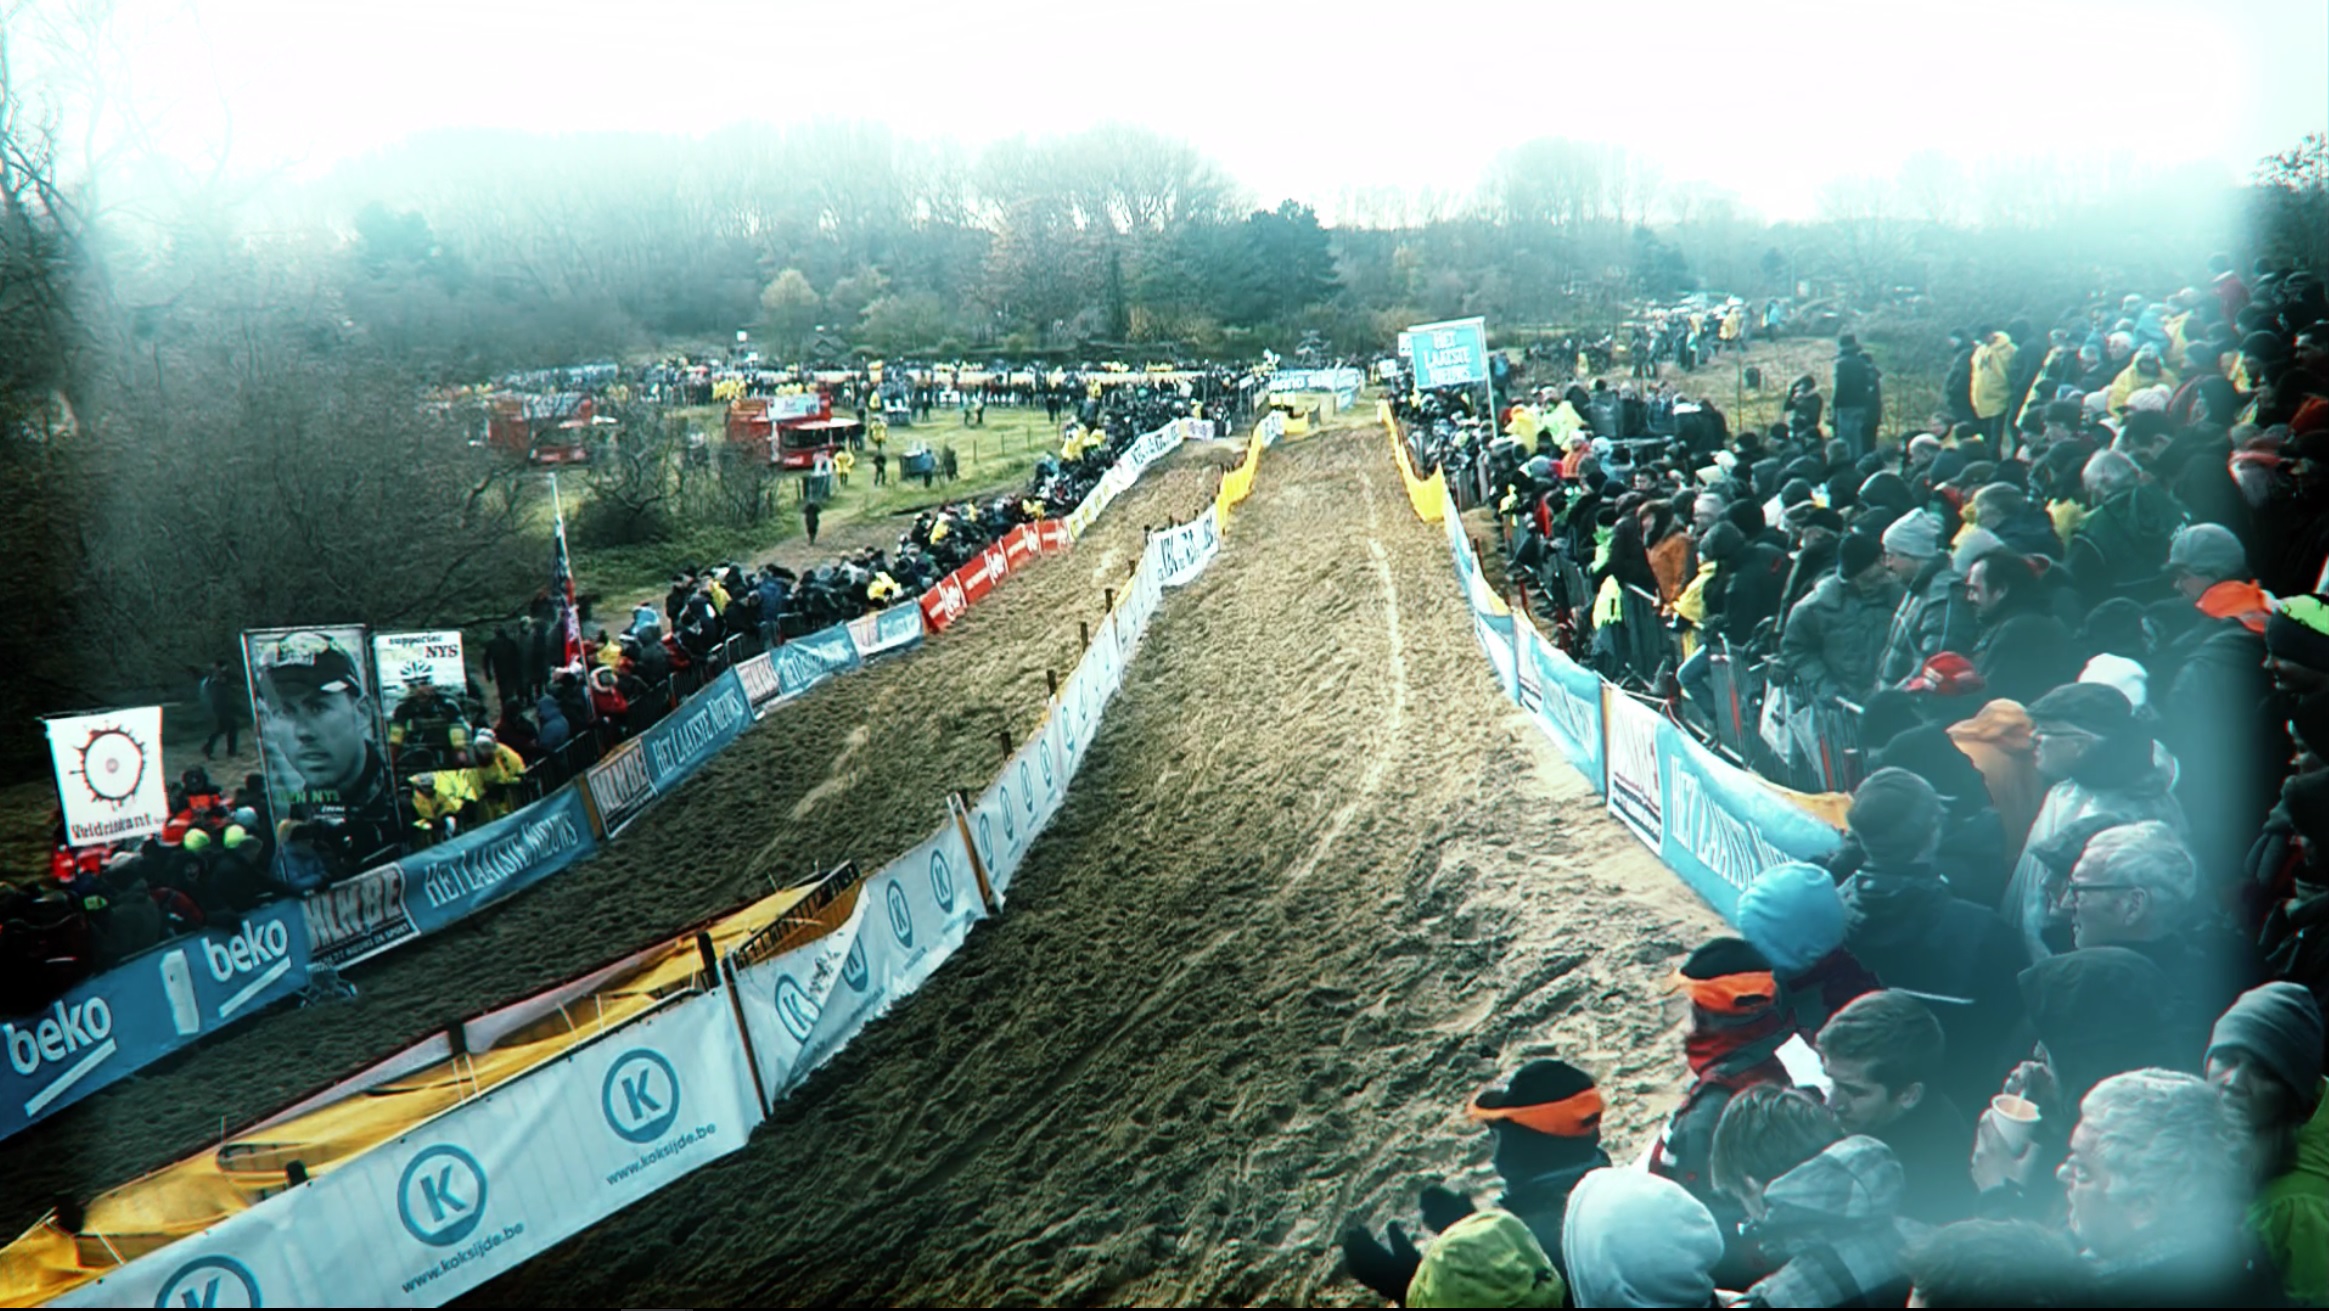 MUST WATCH: Play by Play Battle with Sven vs. Wout vs. Mathieu at the Koksijde World Cup